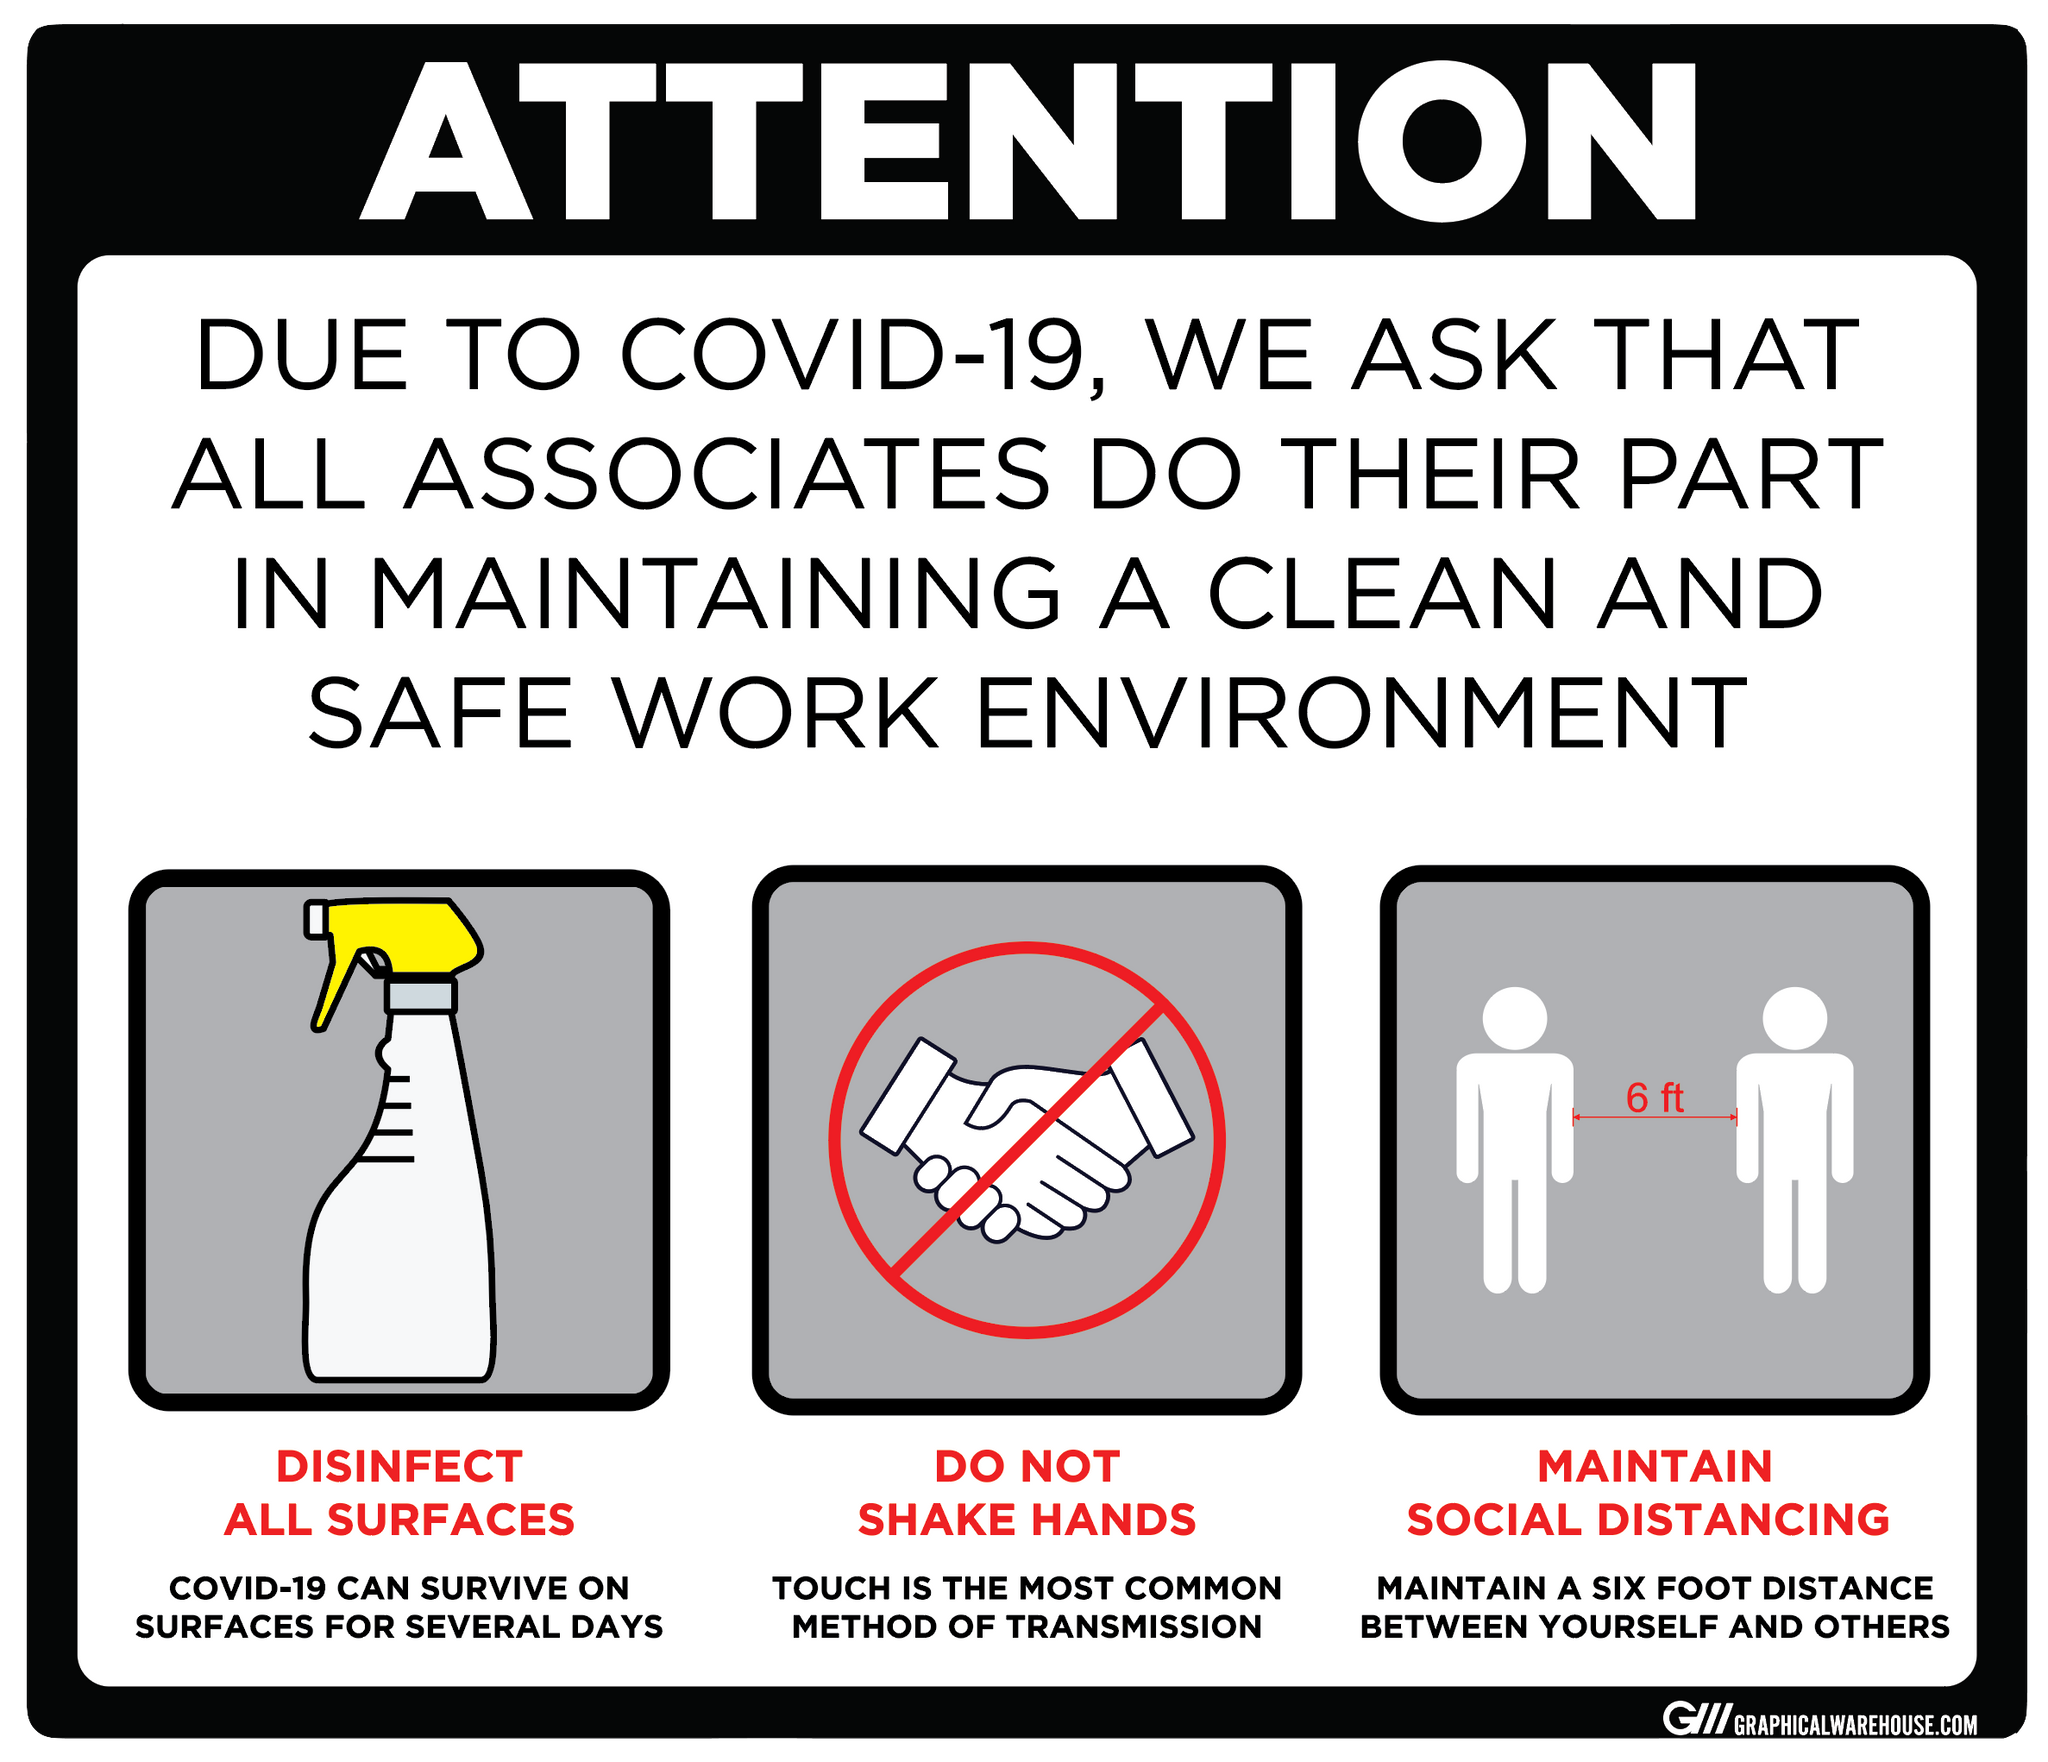 "Maintain a Clean and Safe Work Environment" Adhesive Durable Vinyl Decal- Various Sizes/Colors Available